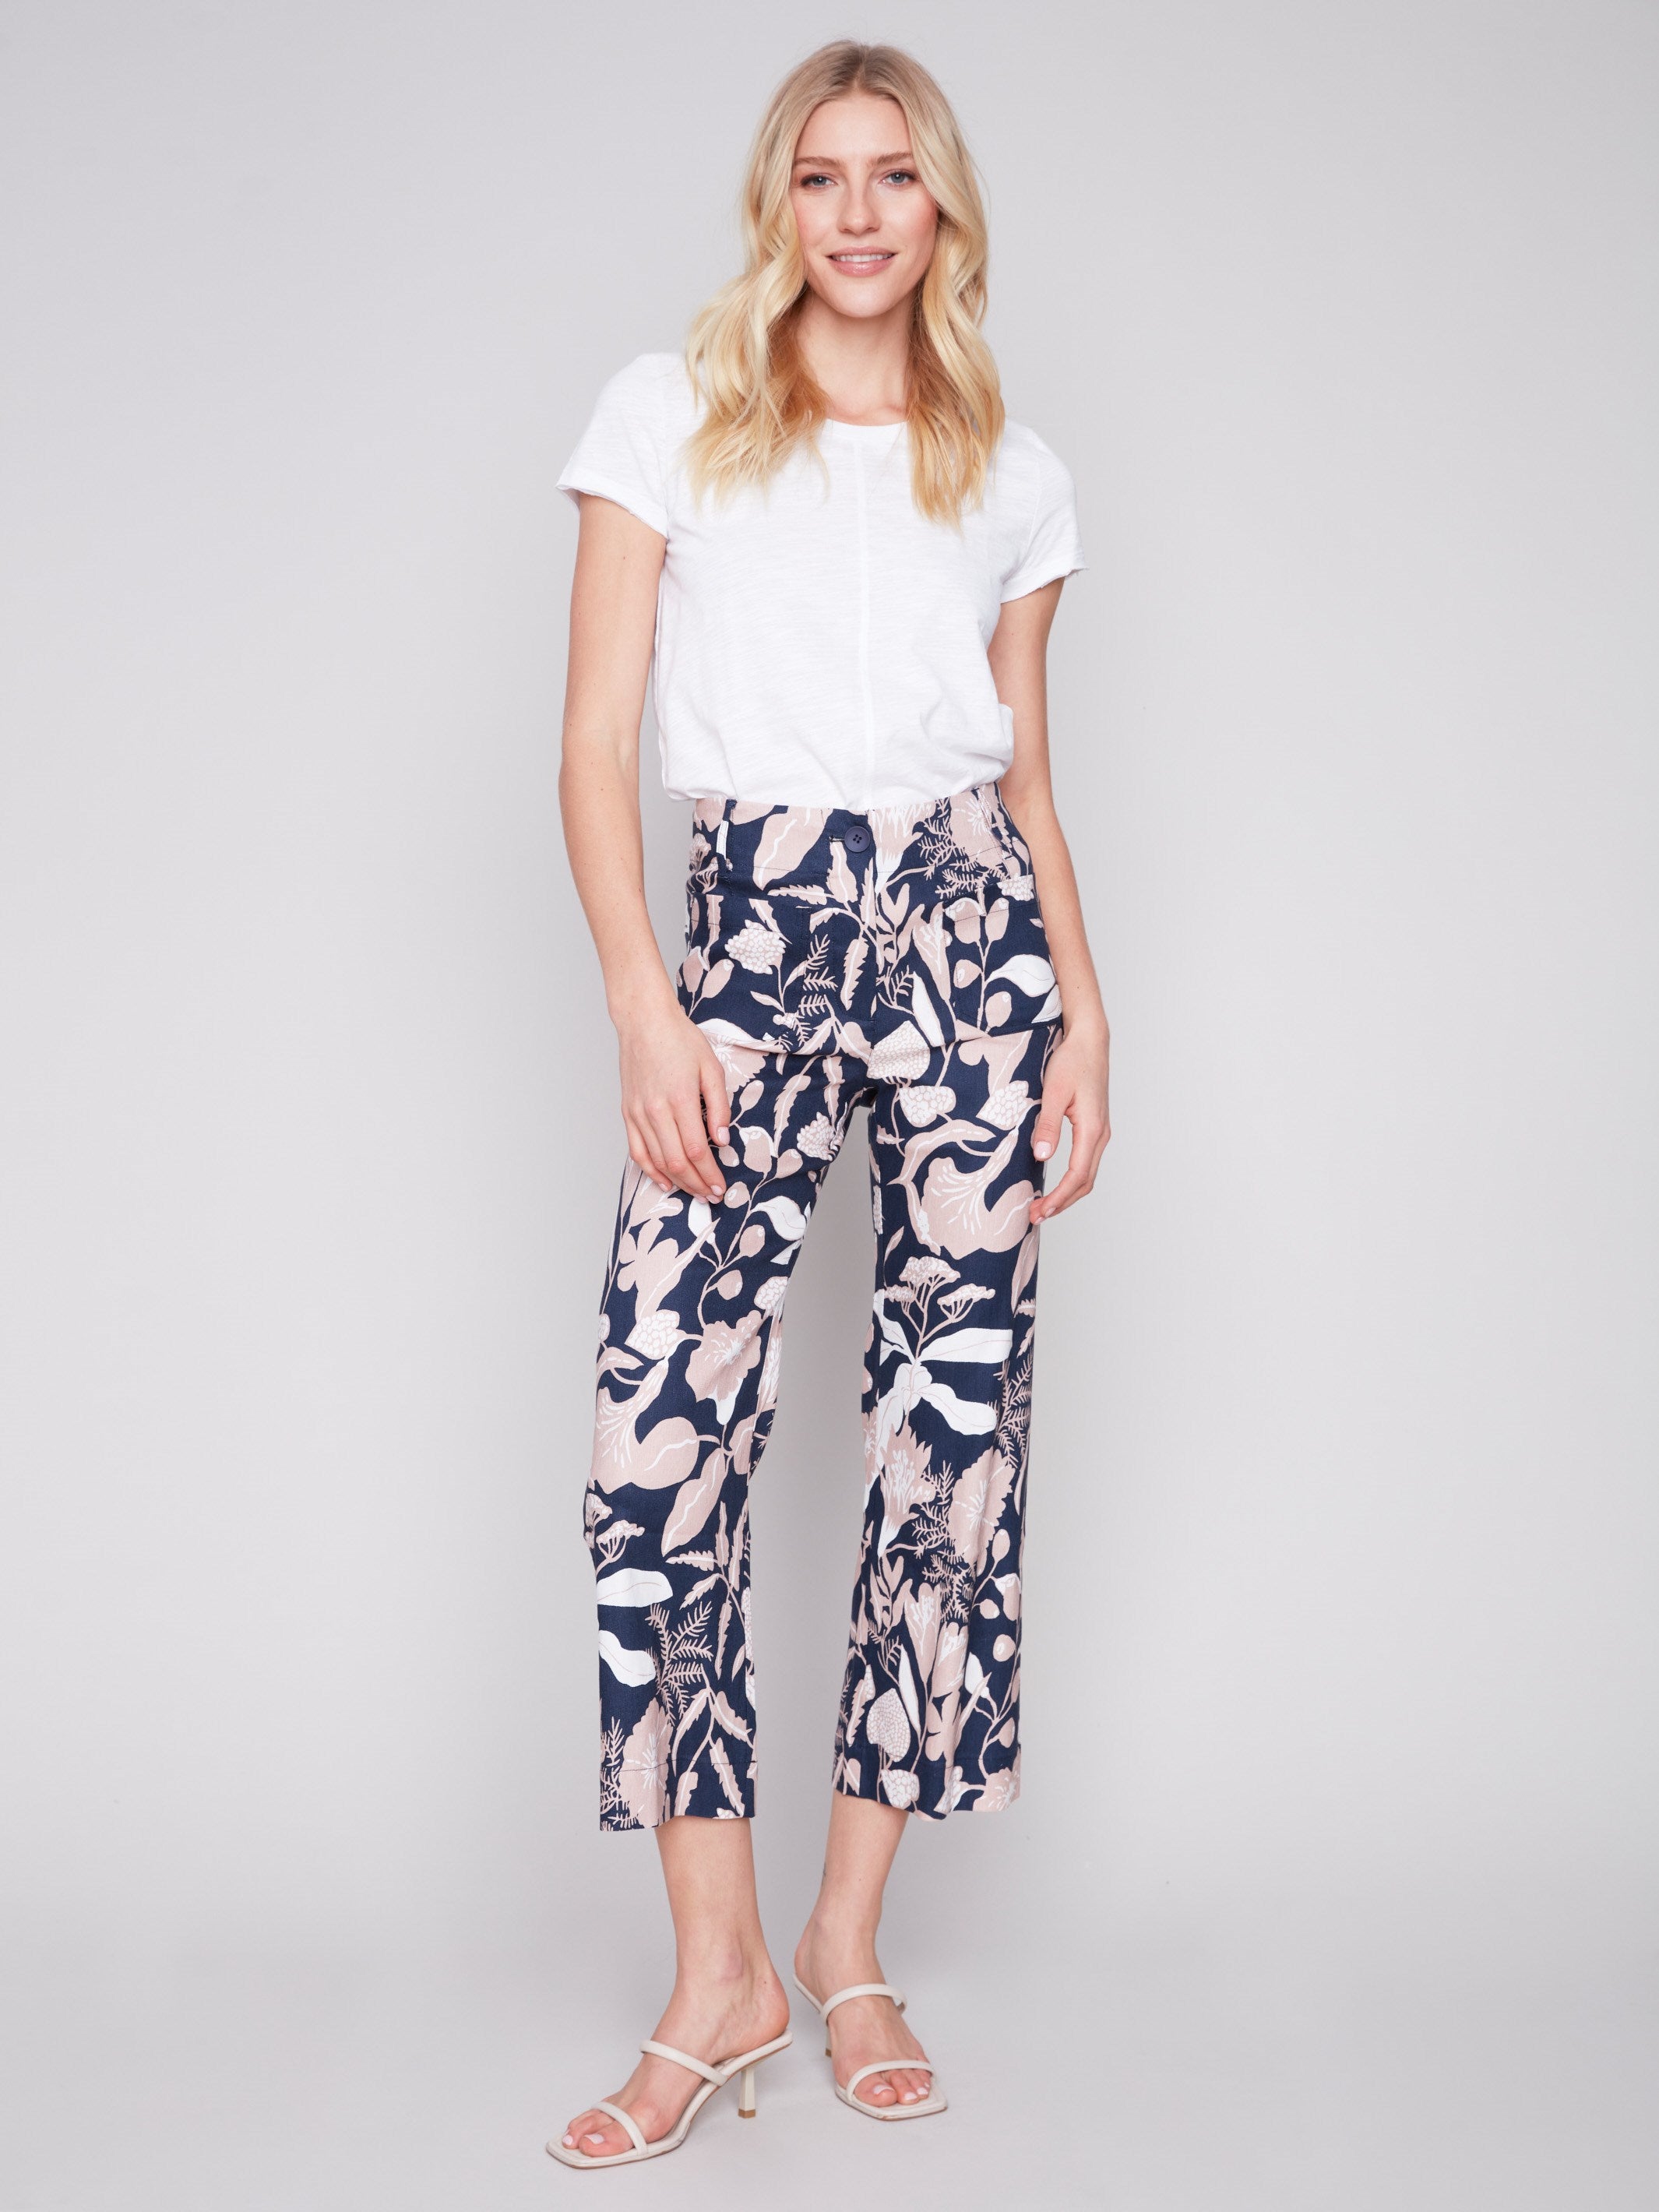 Printed Cropped Linen Blend Pants - Flourish - Charlie B Collection Canada - Image 1